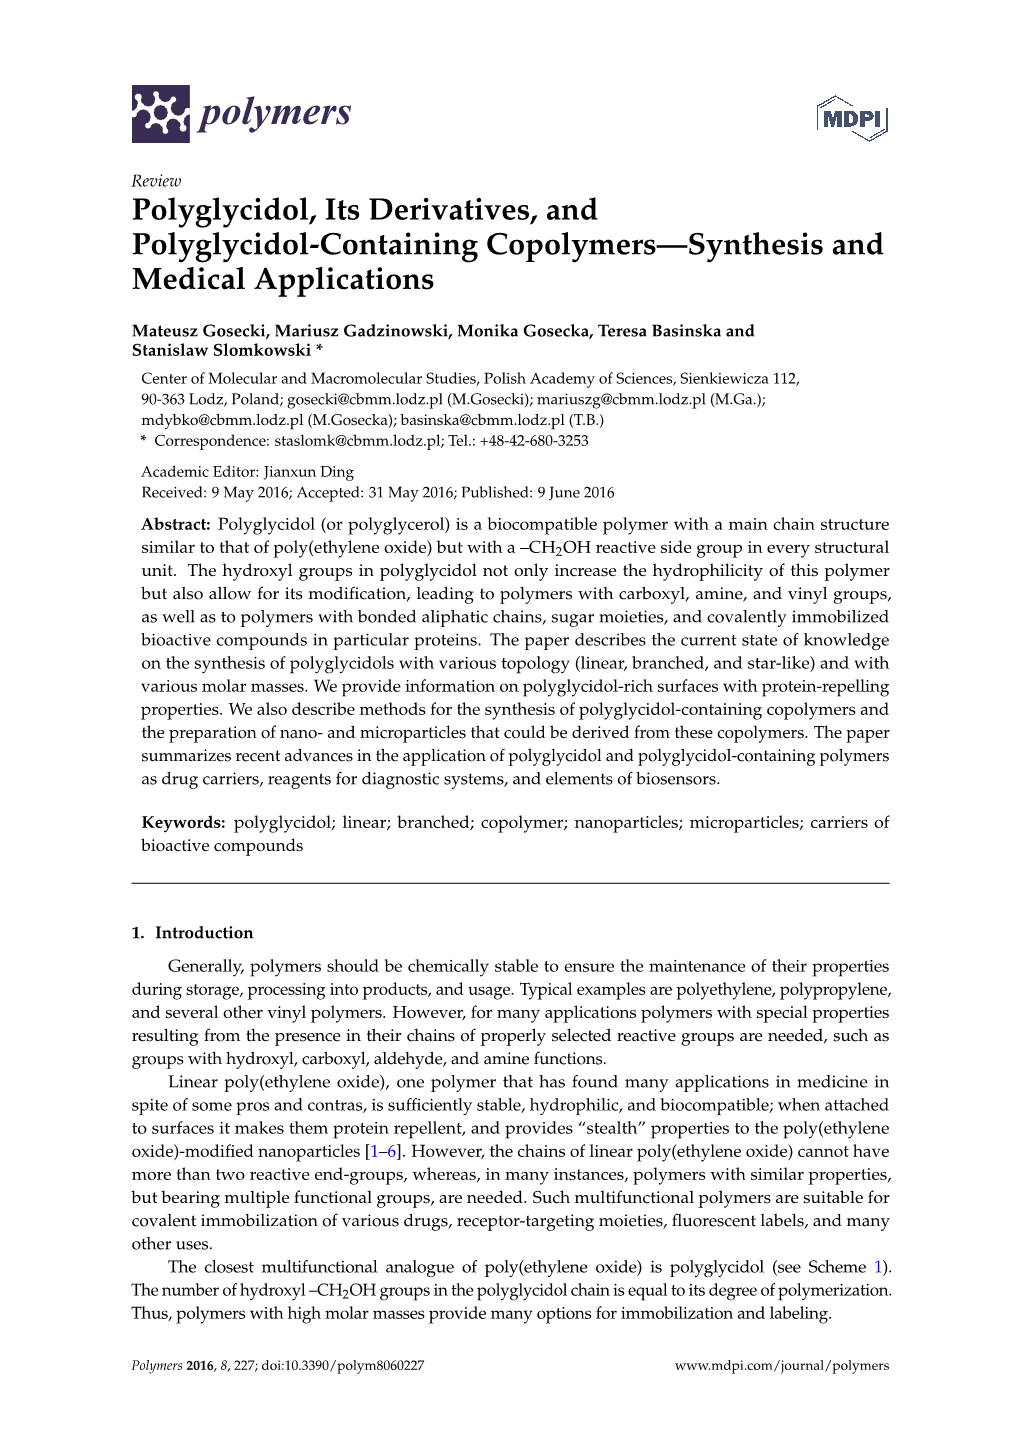 Polyglycidol, Its Derivatives, and Polyglycidol-Containing Copolymers—Synthesis and Medical Applications